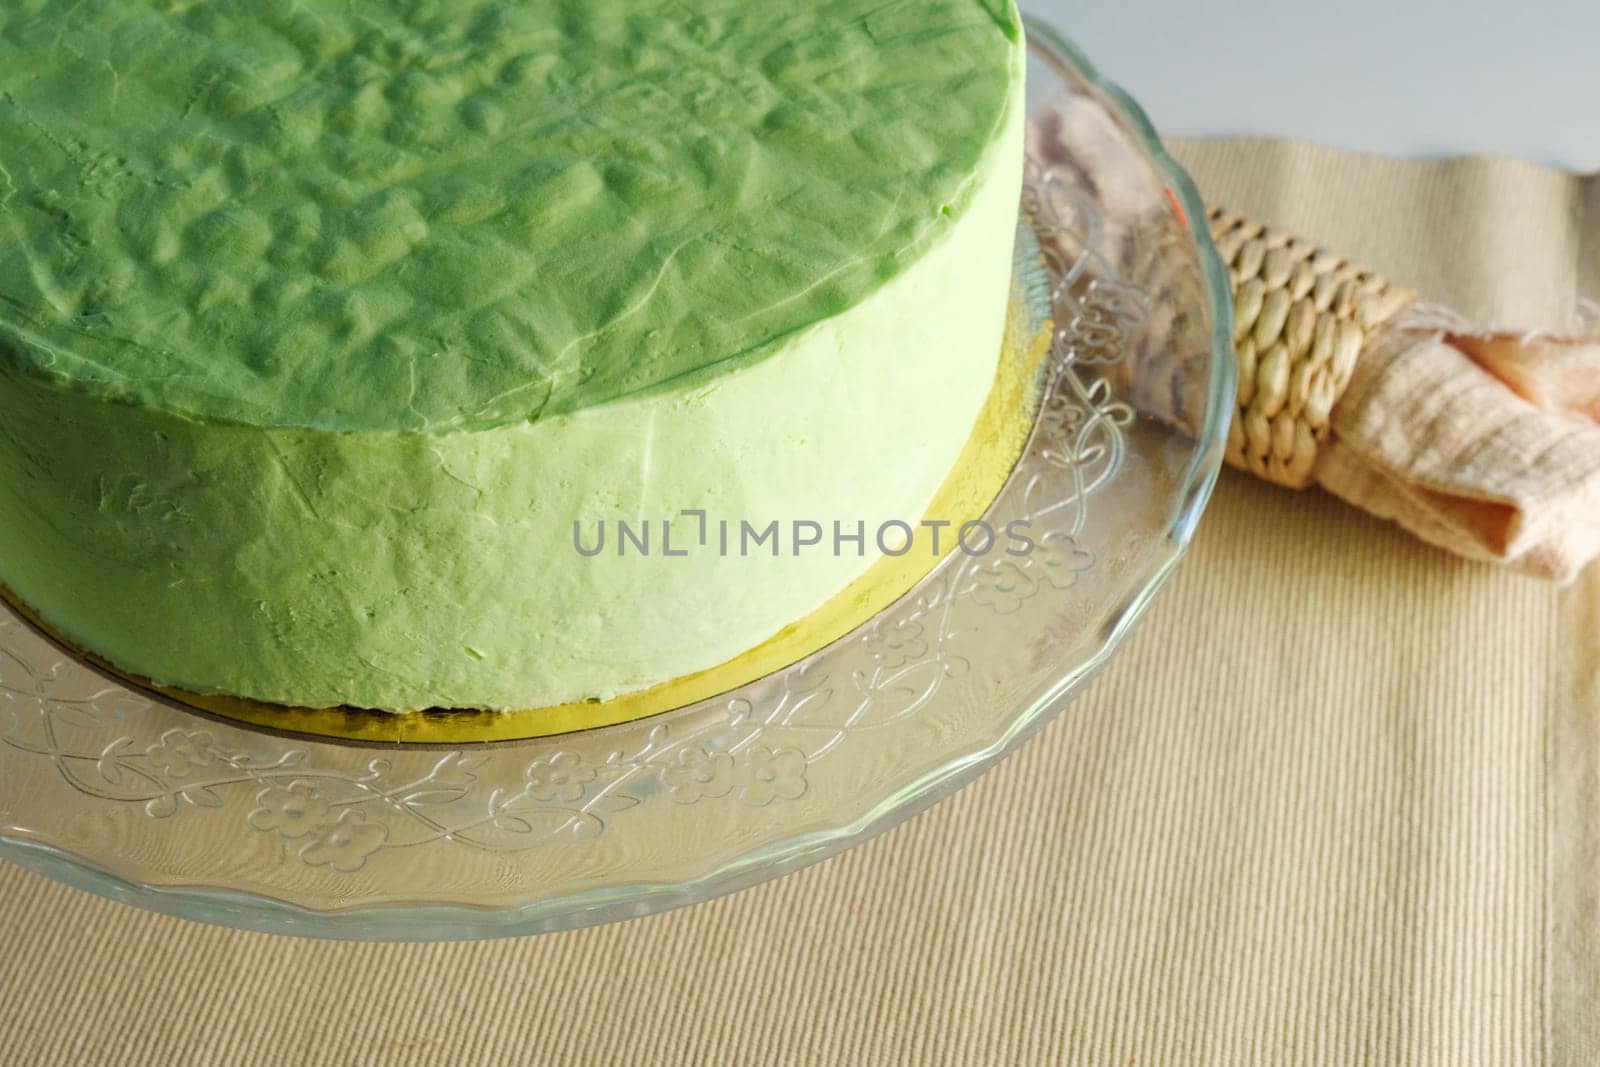 Enigmatic Emerald: A Vibrant Green Cake Gracefully Adorns a Delicate Glass Plate by darksoul72